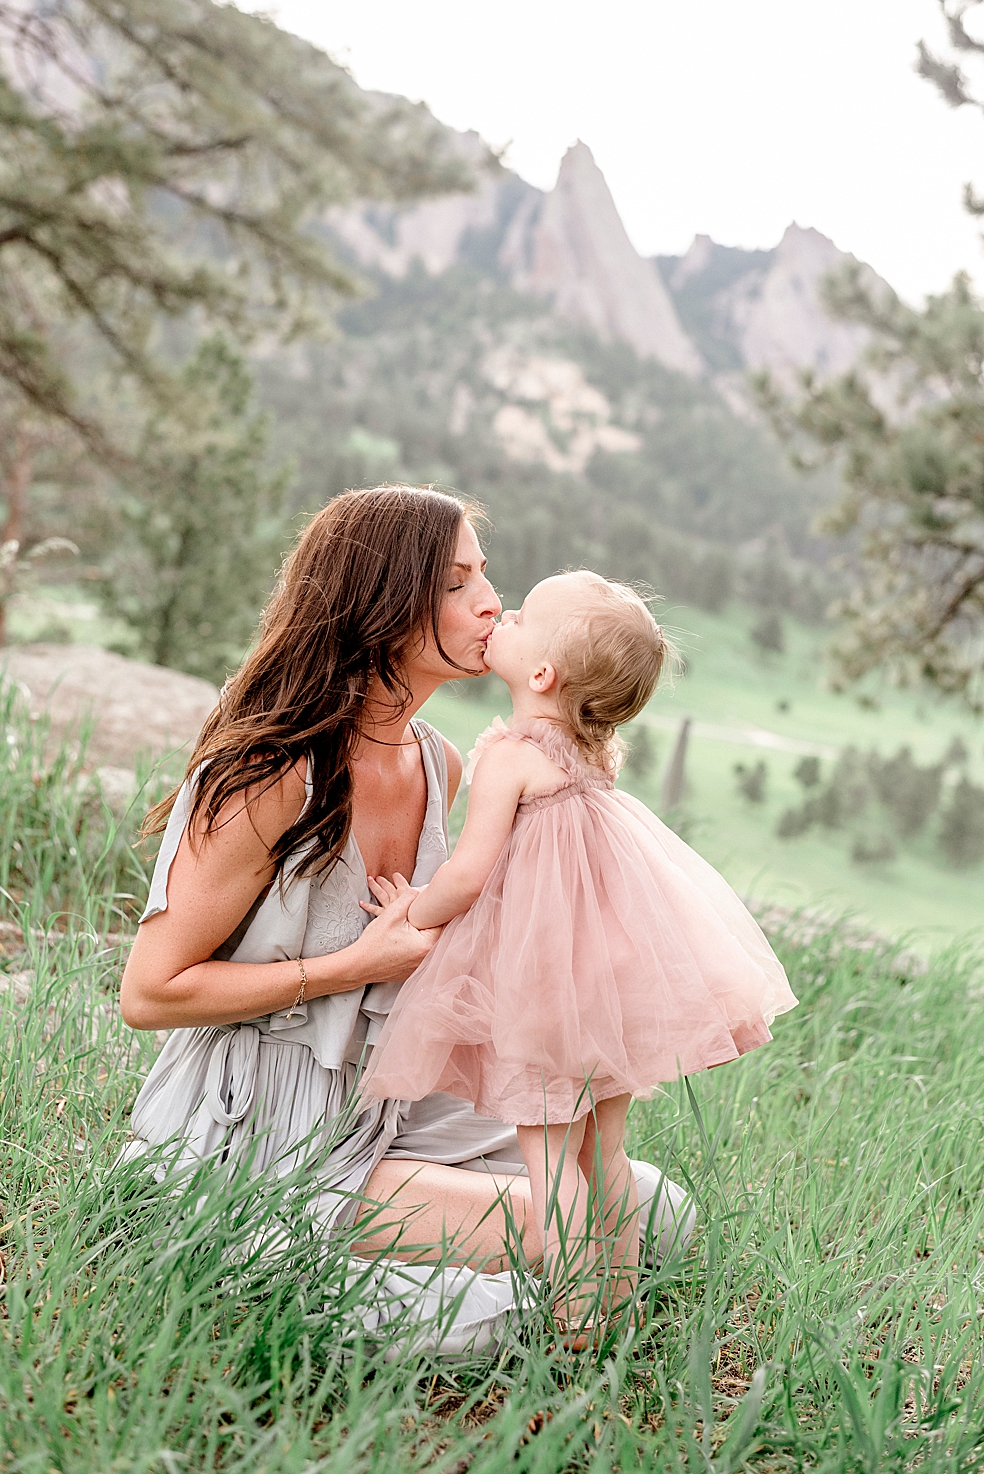 Daughter giving mom a kiss | Photo by Decatur Alabama Family Photographer Jessica Lee